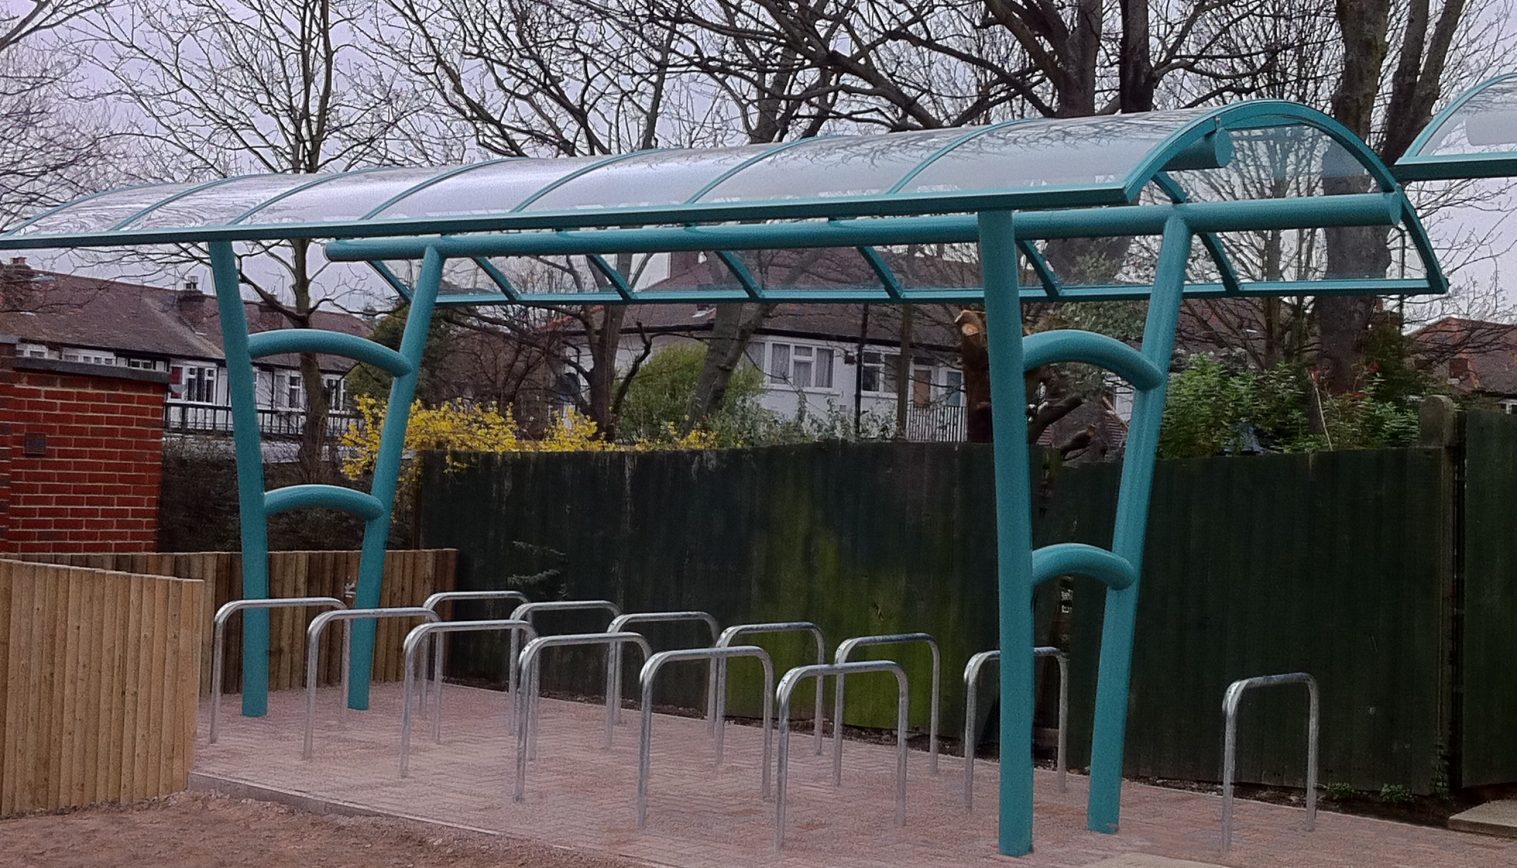 St Saviours Primary School – Cycle Shelter